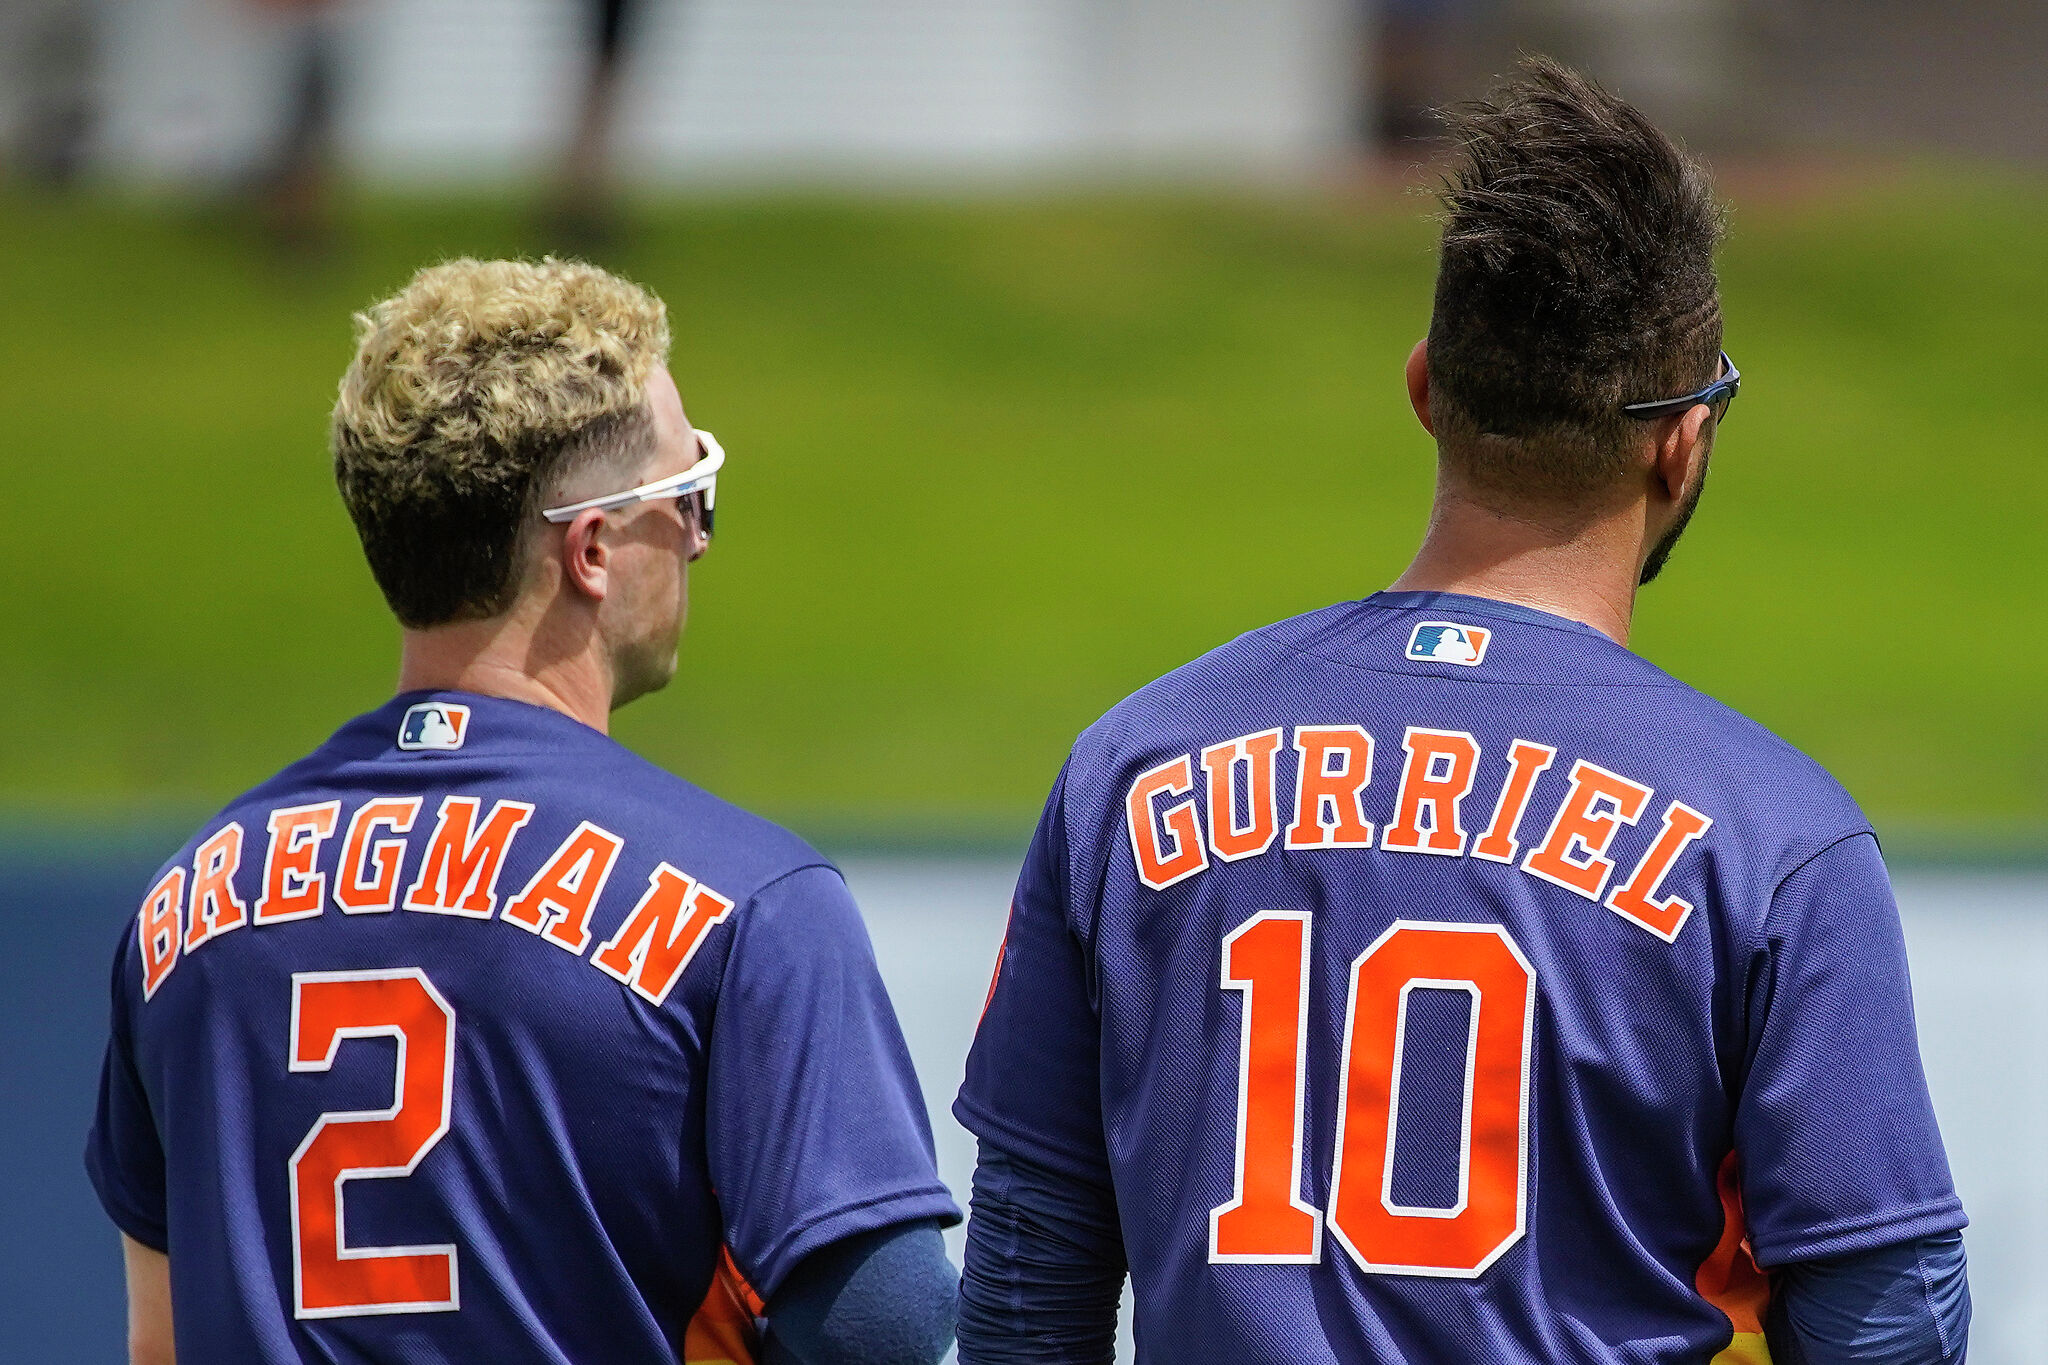 Before it's too late: Yuli Gurriel is making sense for the Astros